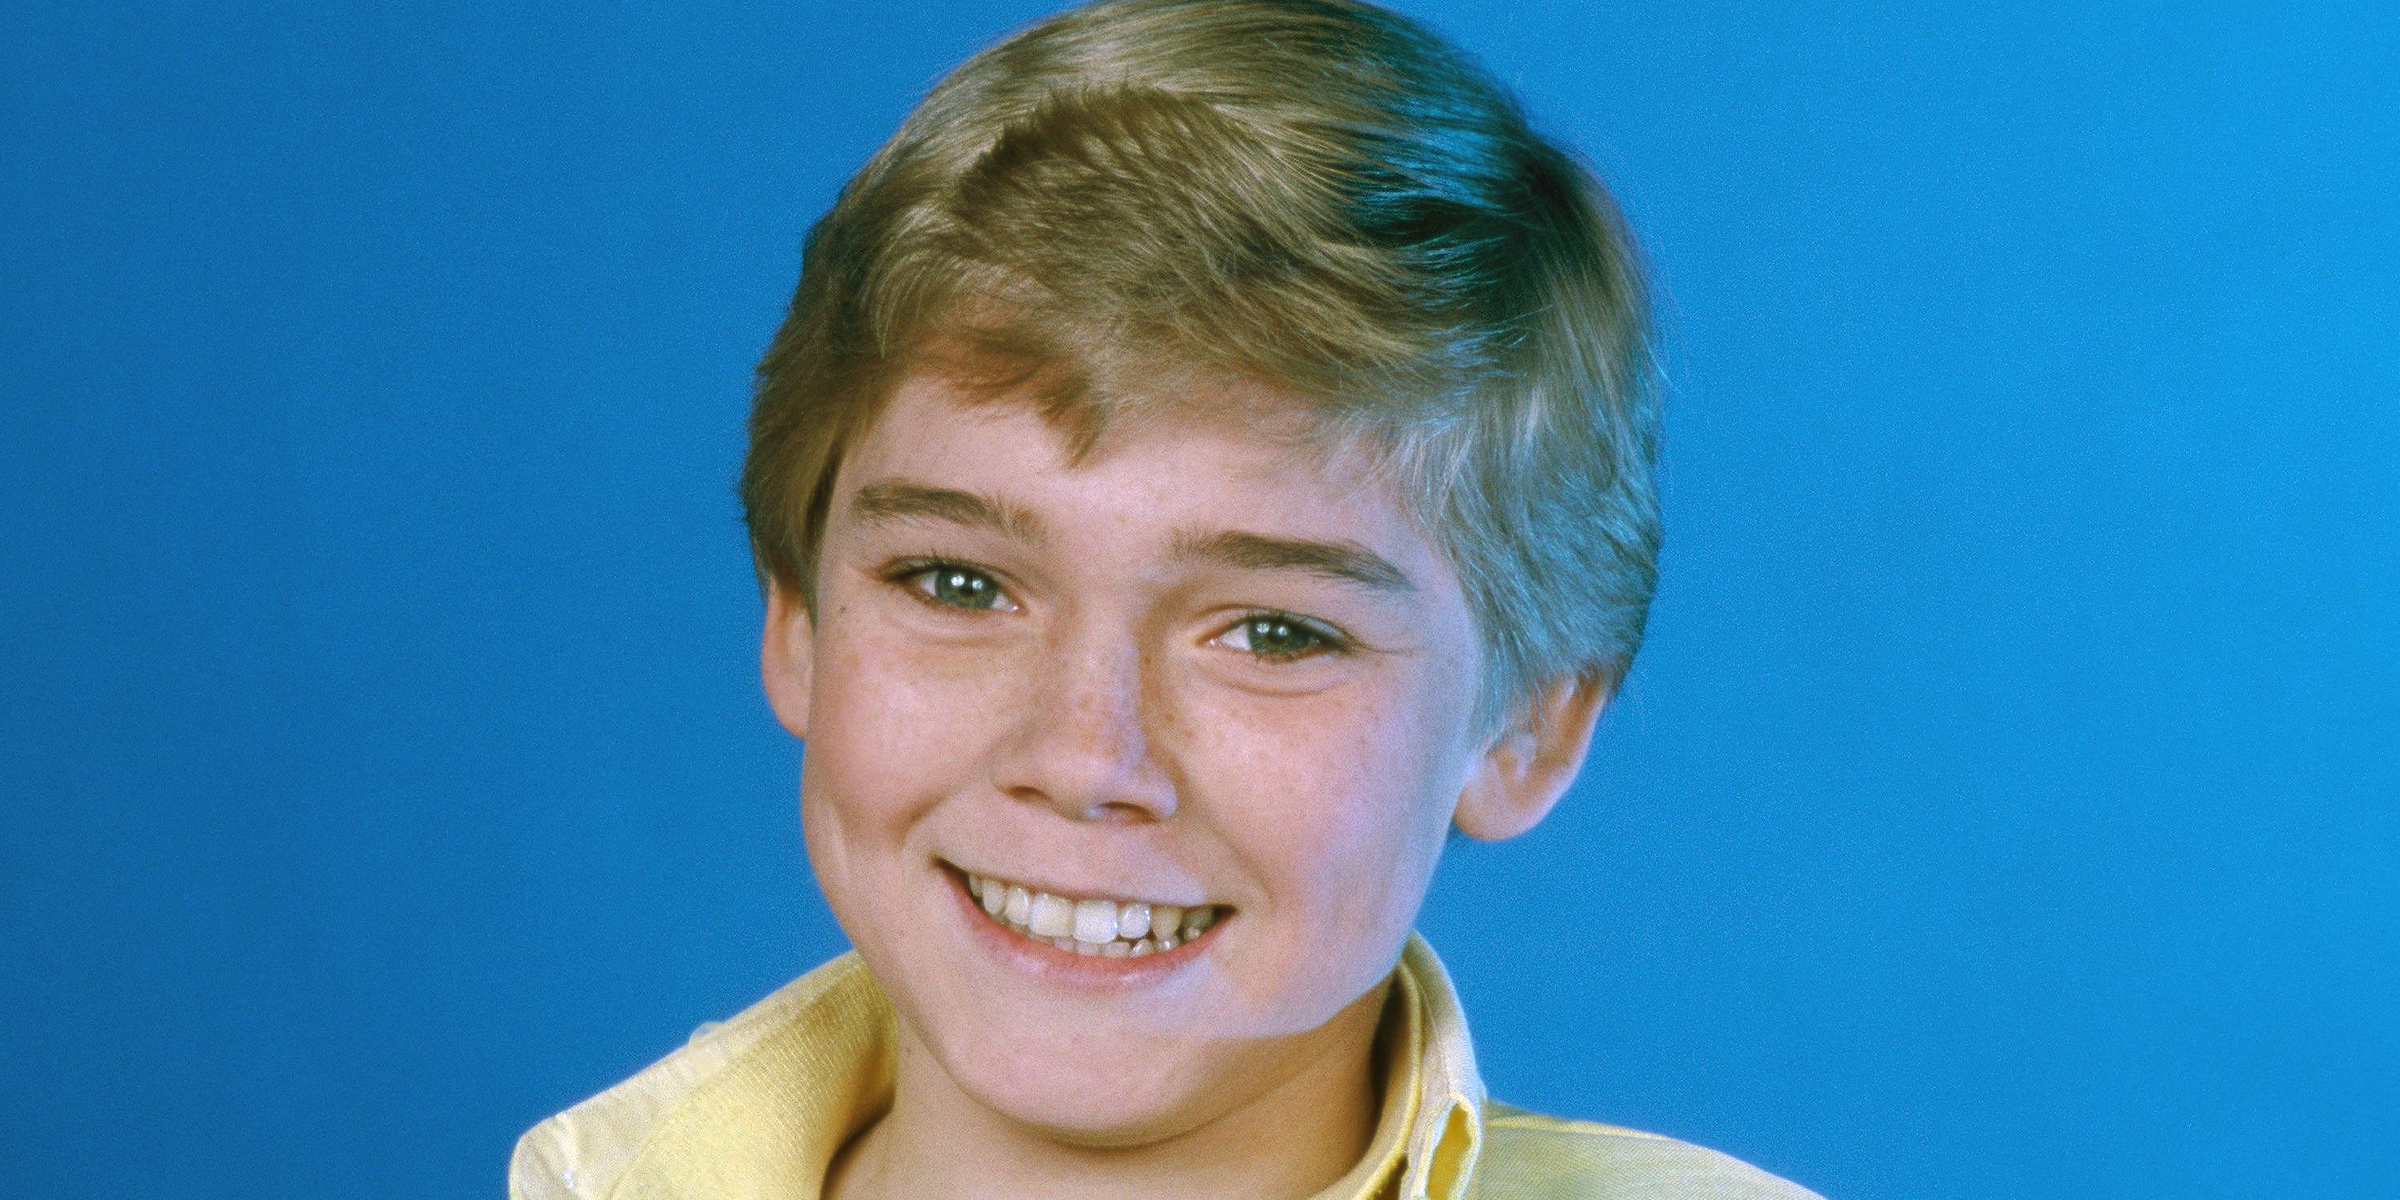 Ricky Schroder | Source: Getty Images